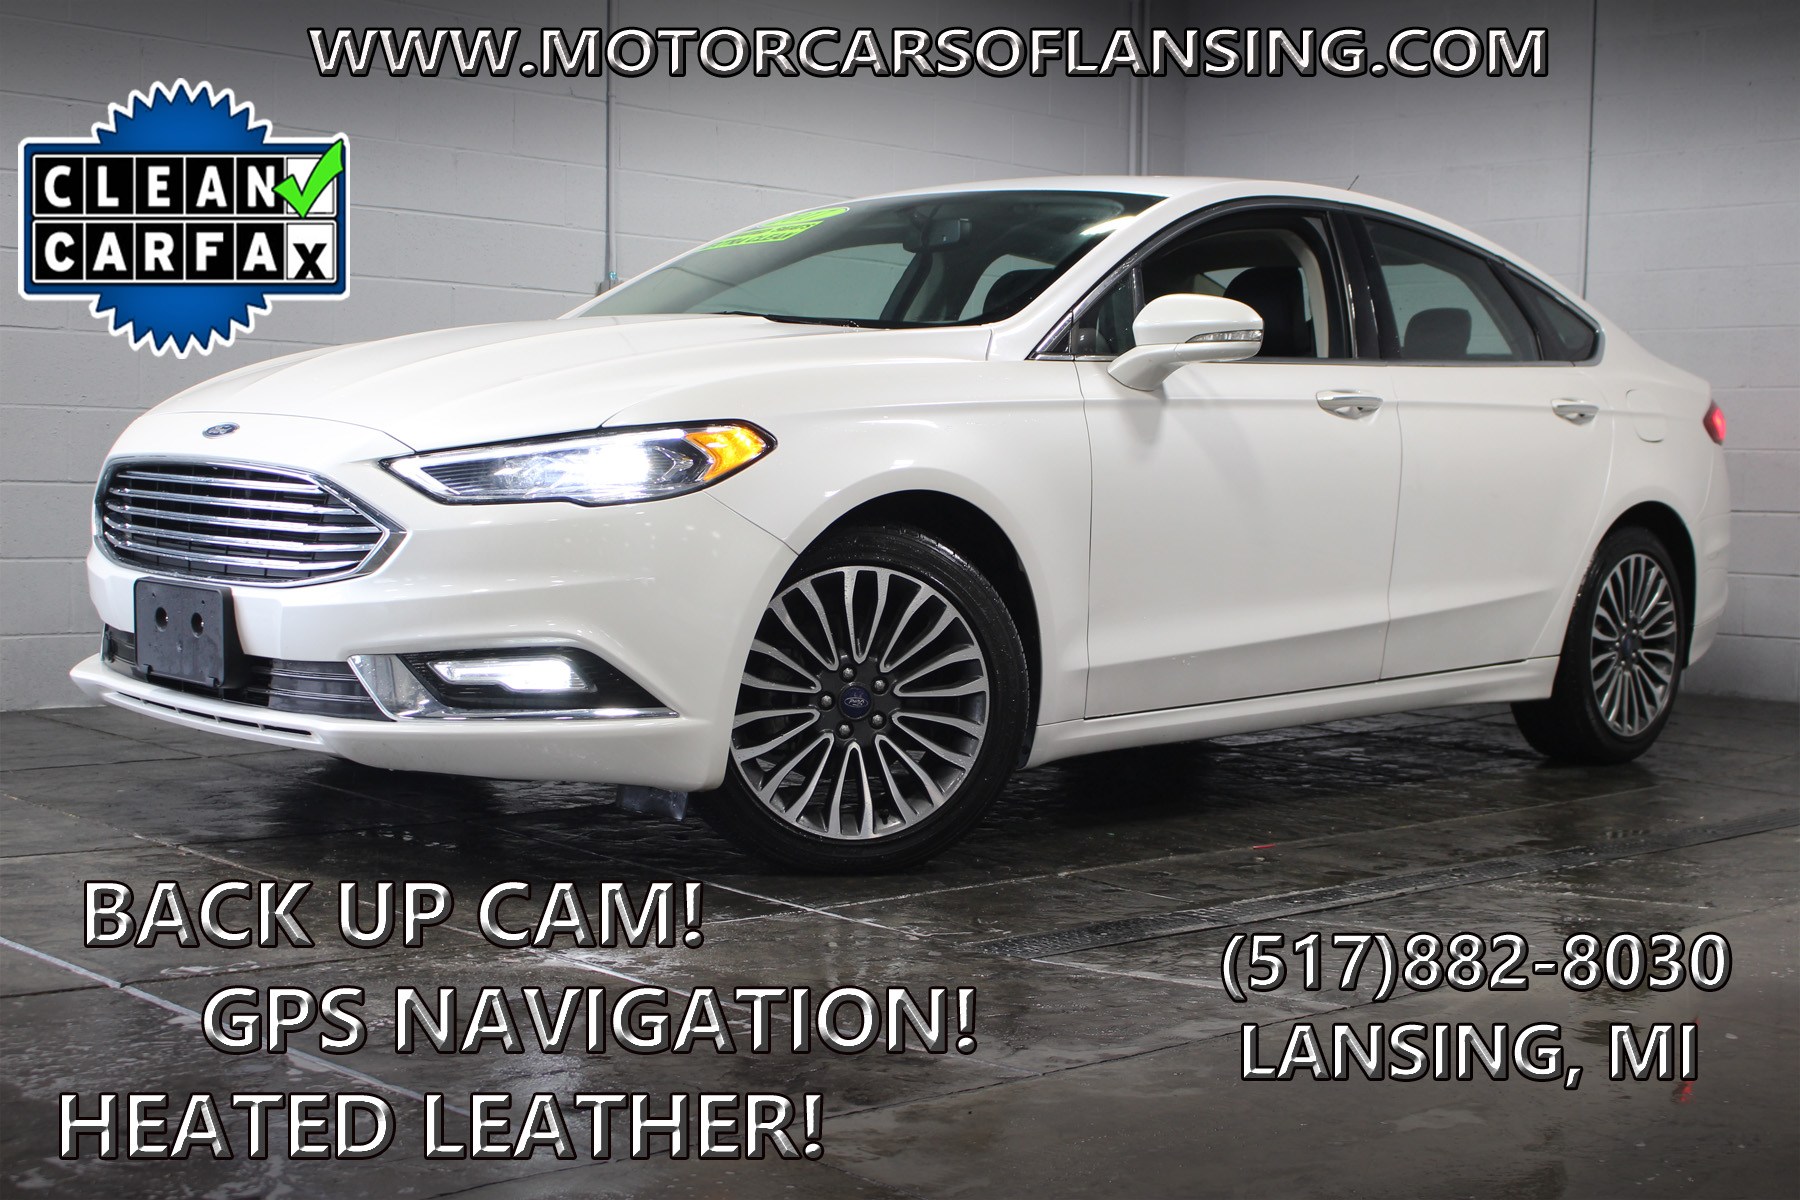 2017 Ford Fusion, Oxford White with 14152 Miles available now!